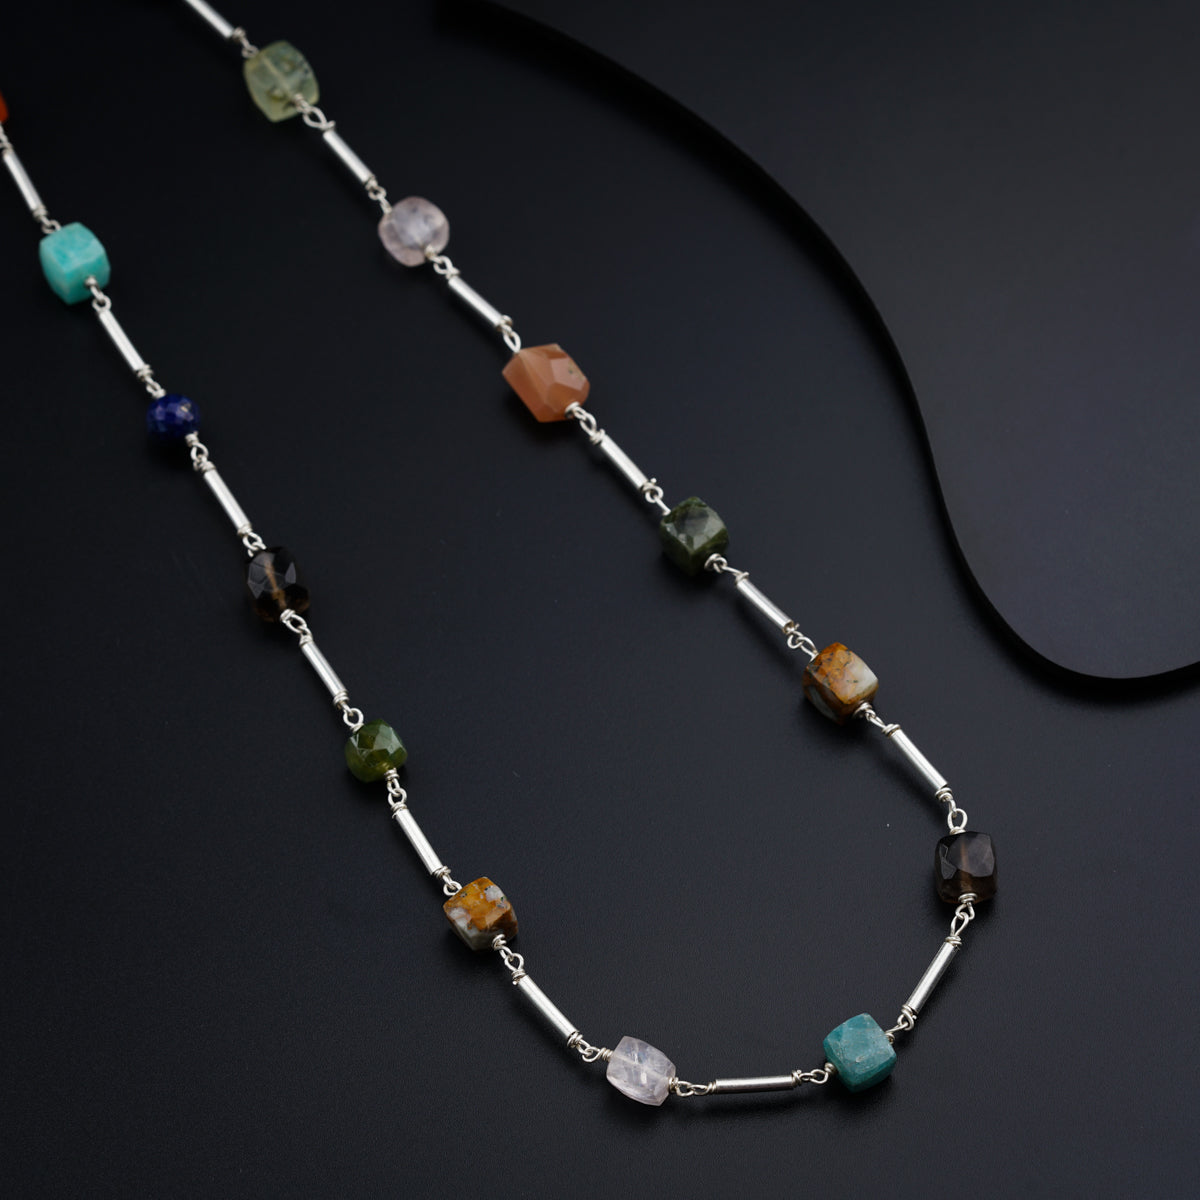 Silver pipe necklace with multicolored stones